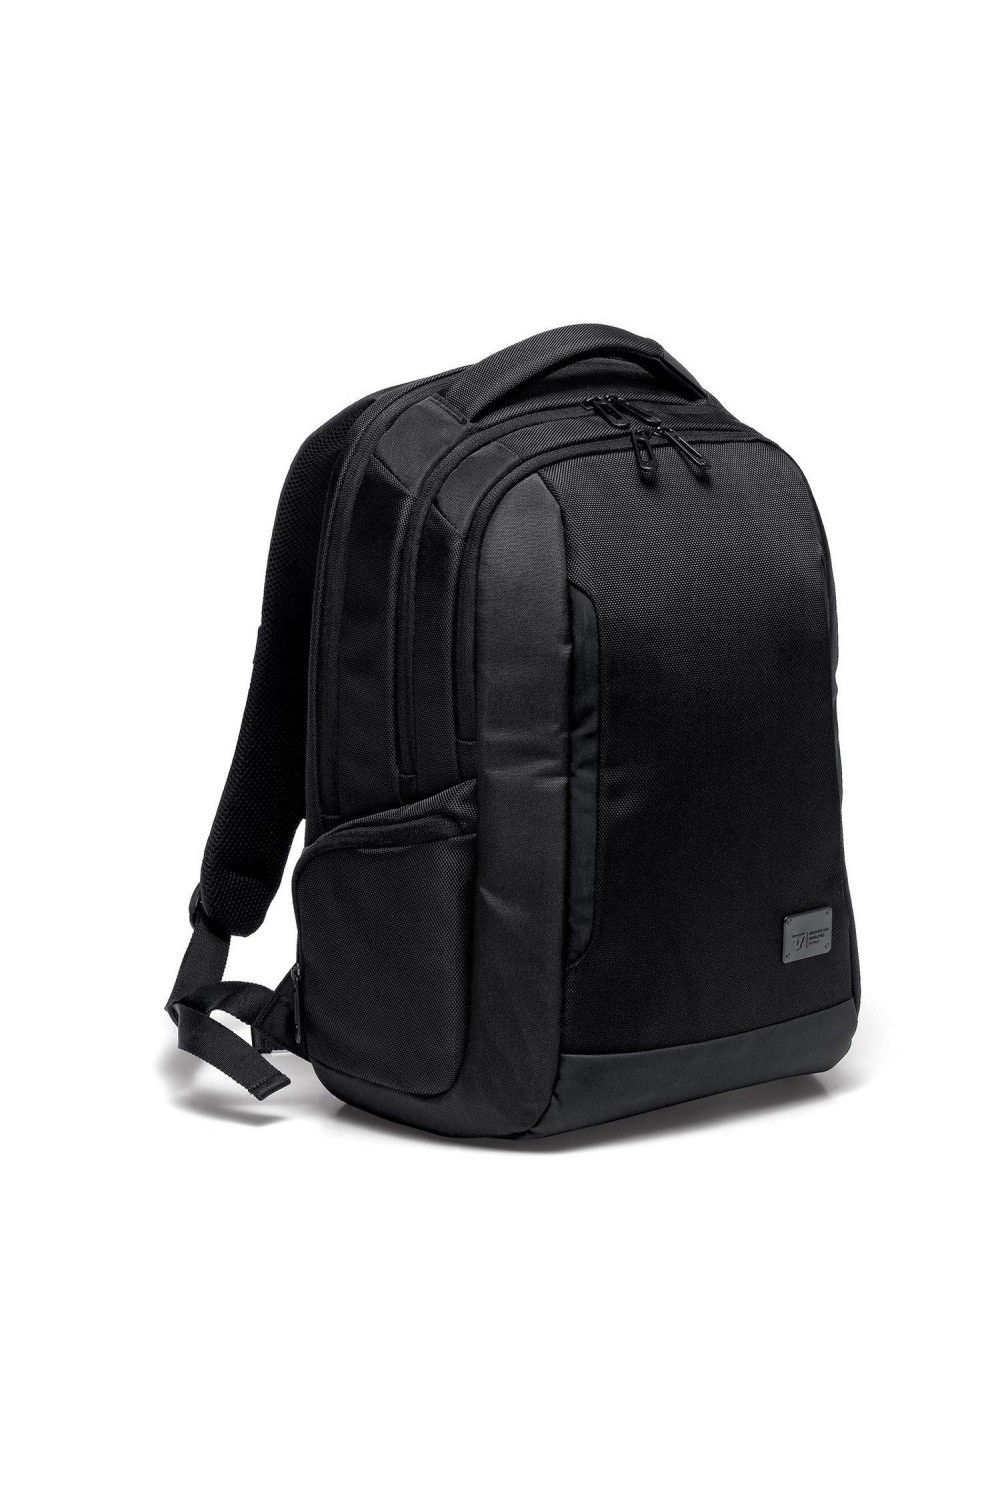 Roncato laptop backpack Desk 15.6 inches